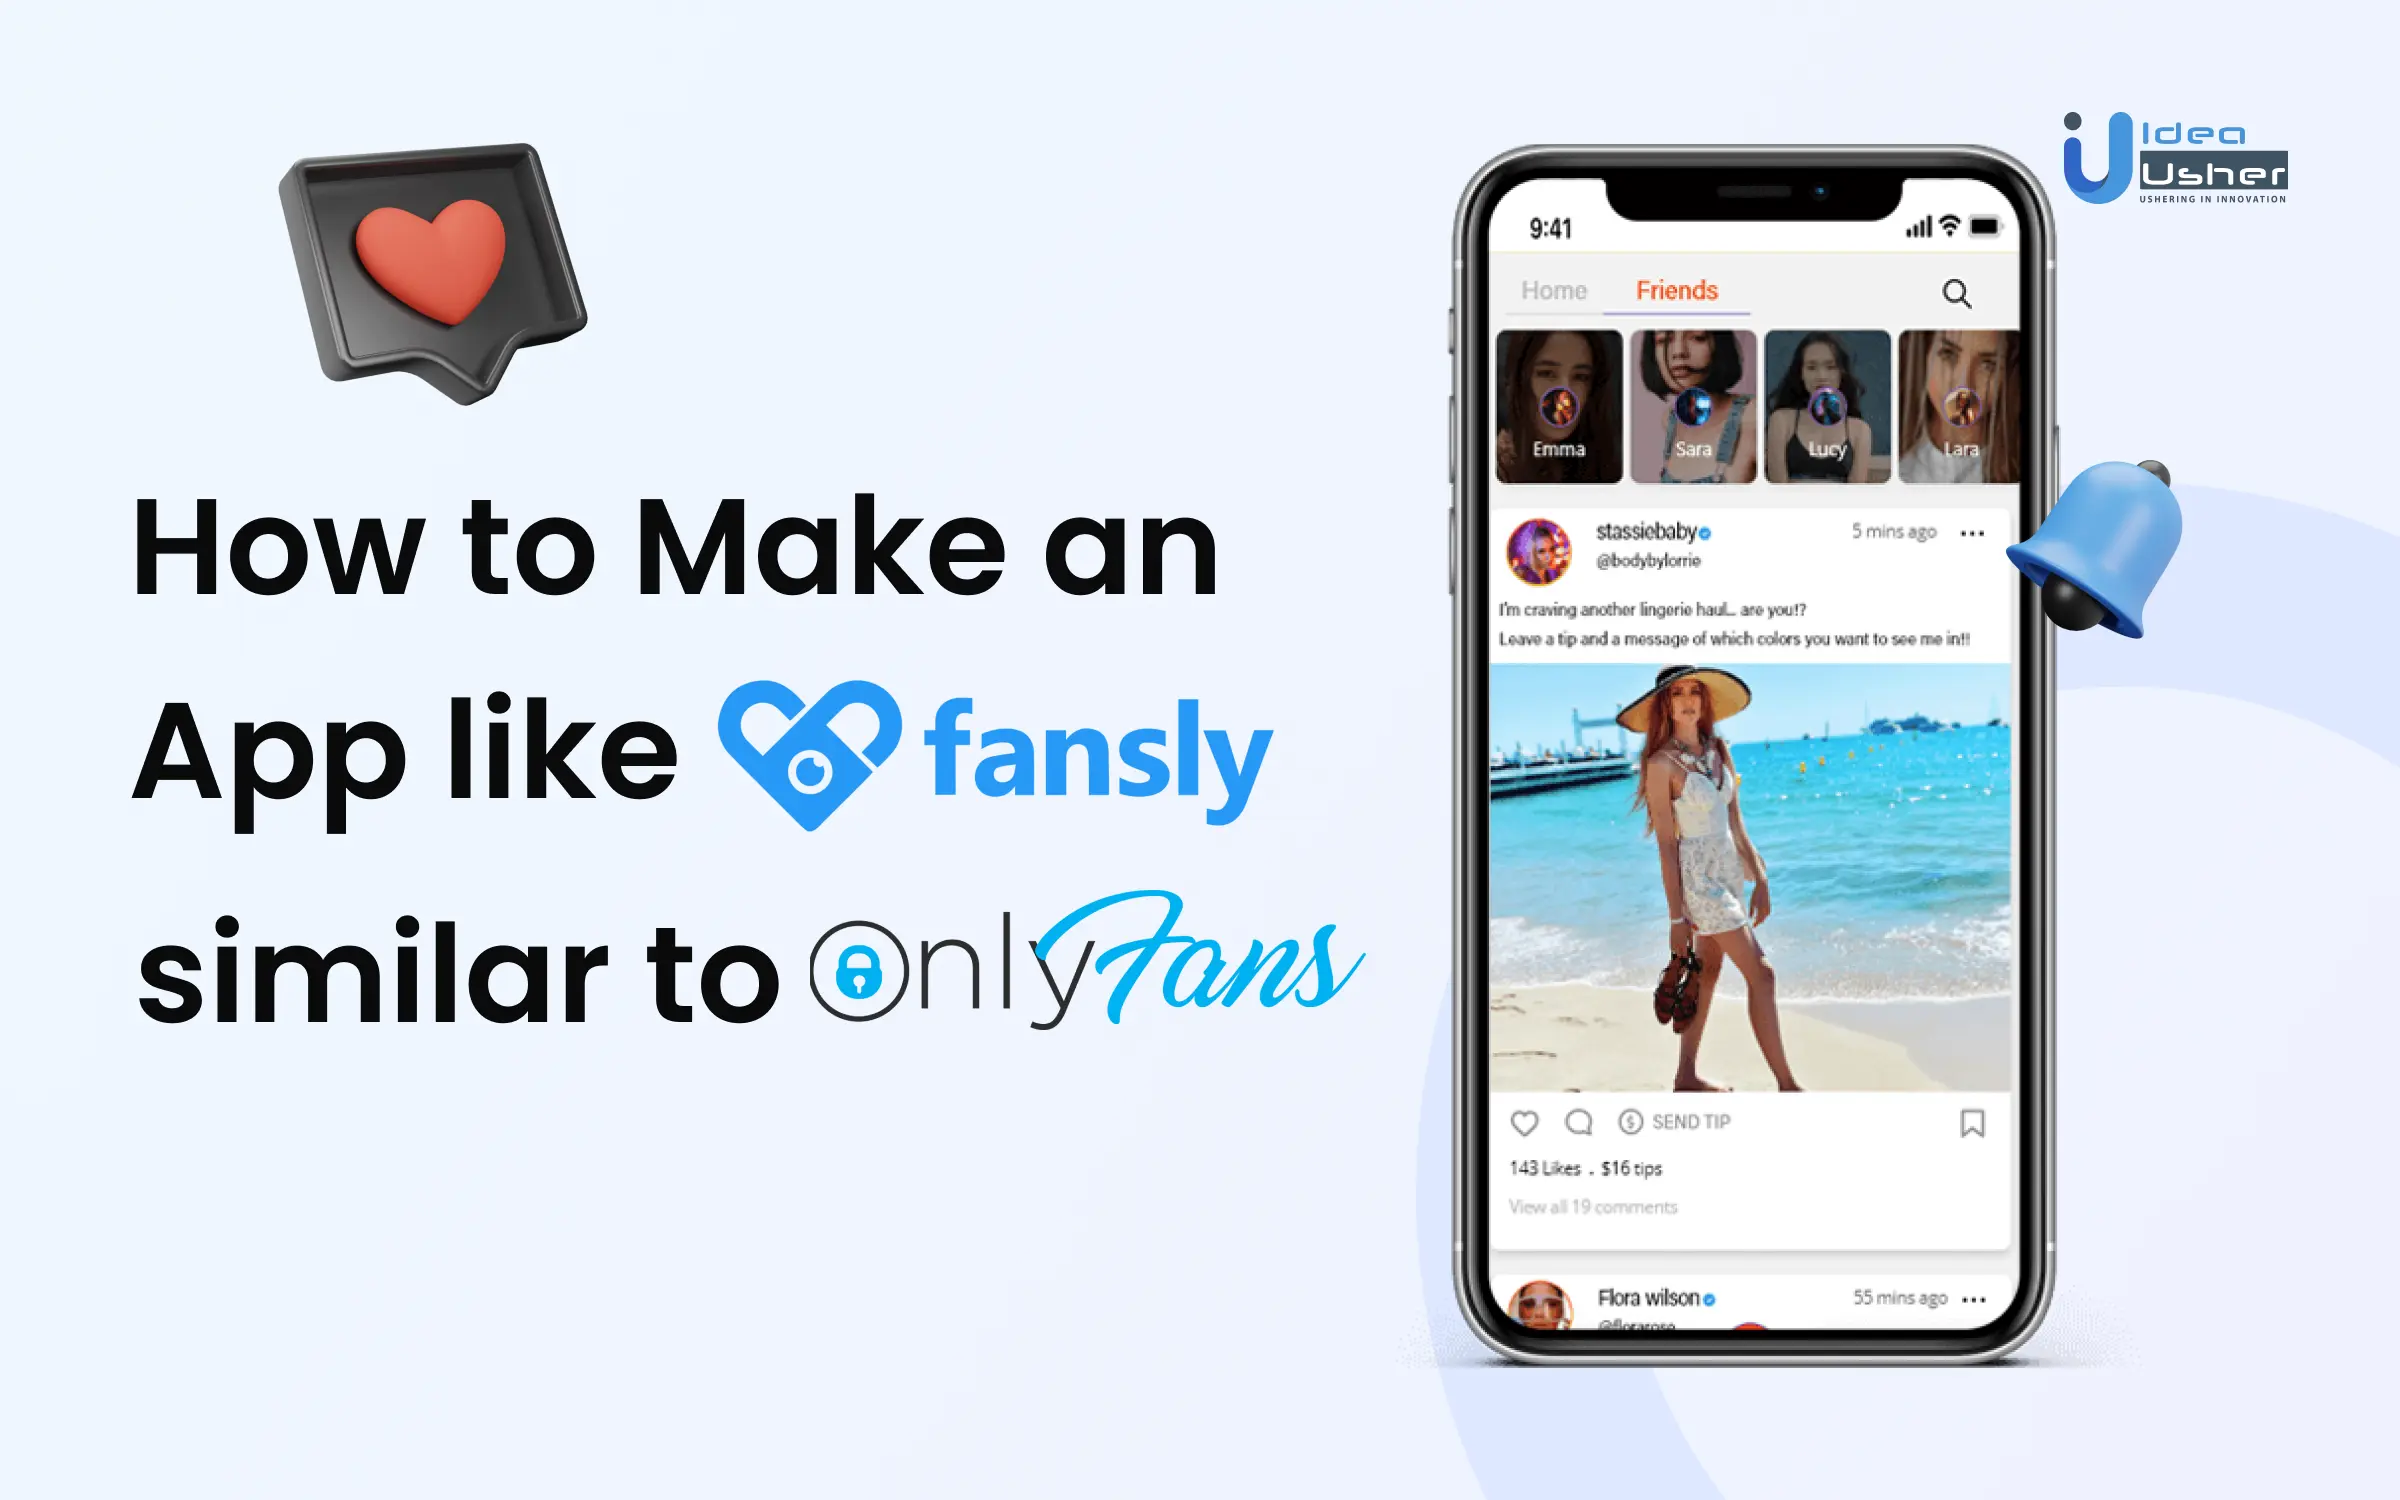 How To Make An App Like Fansly Similar To OnlyFans - Idea Usher